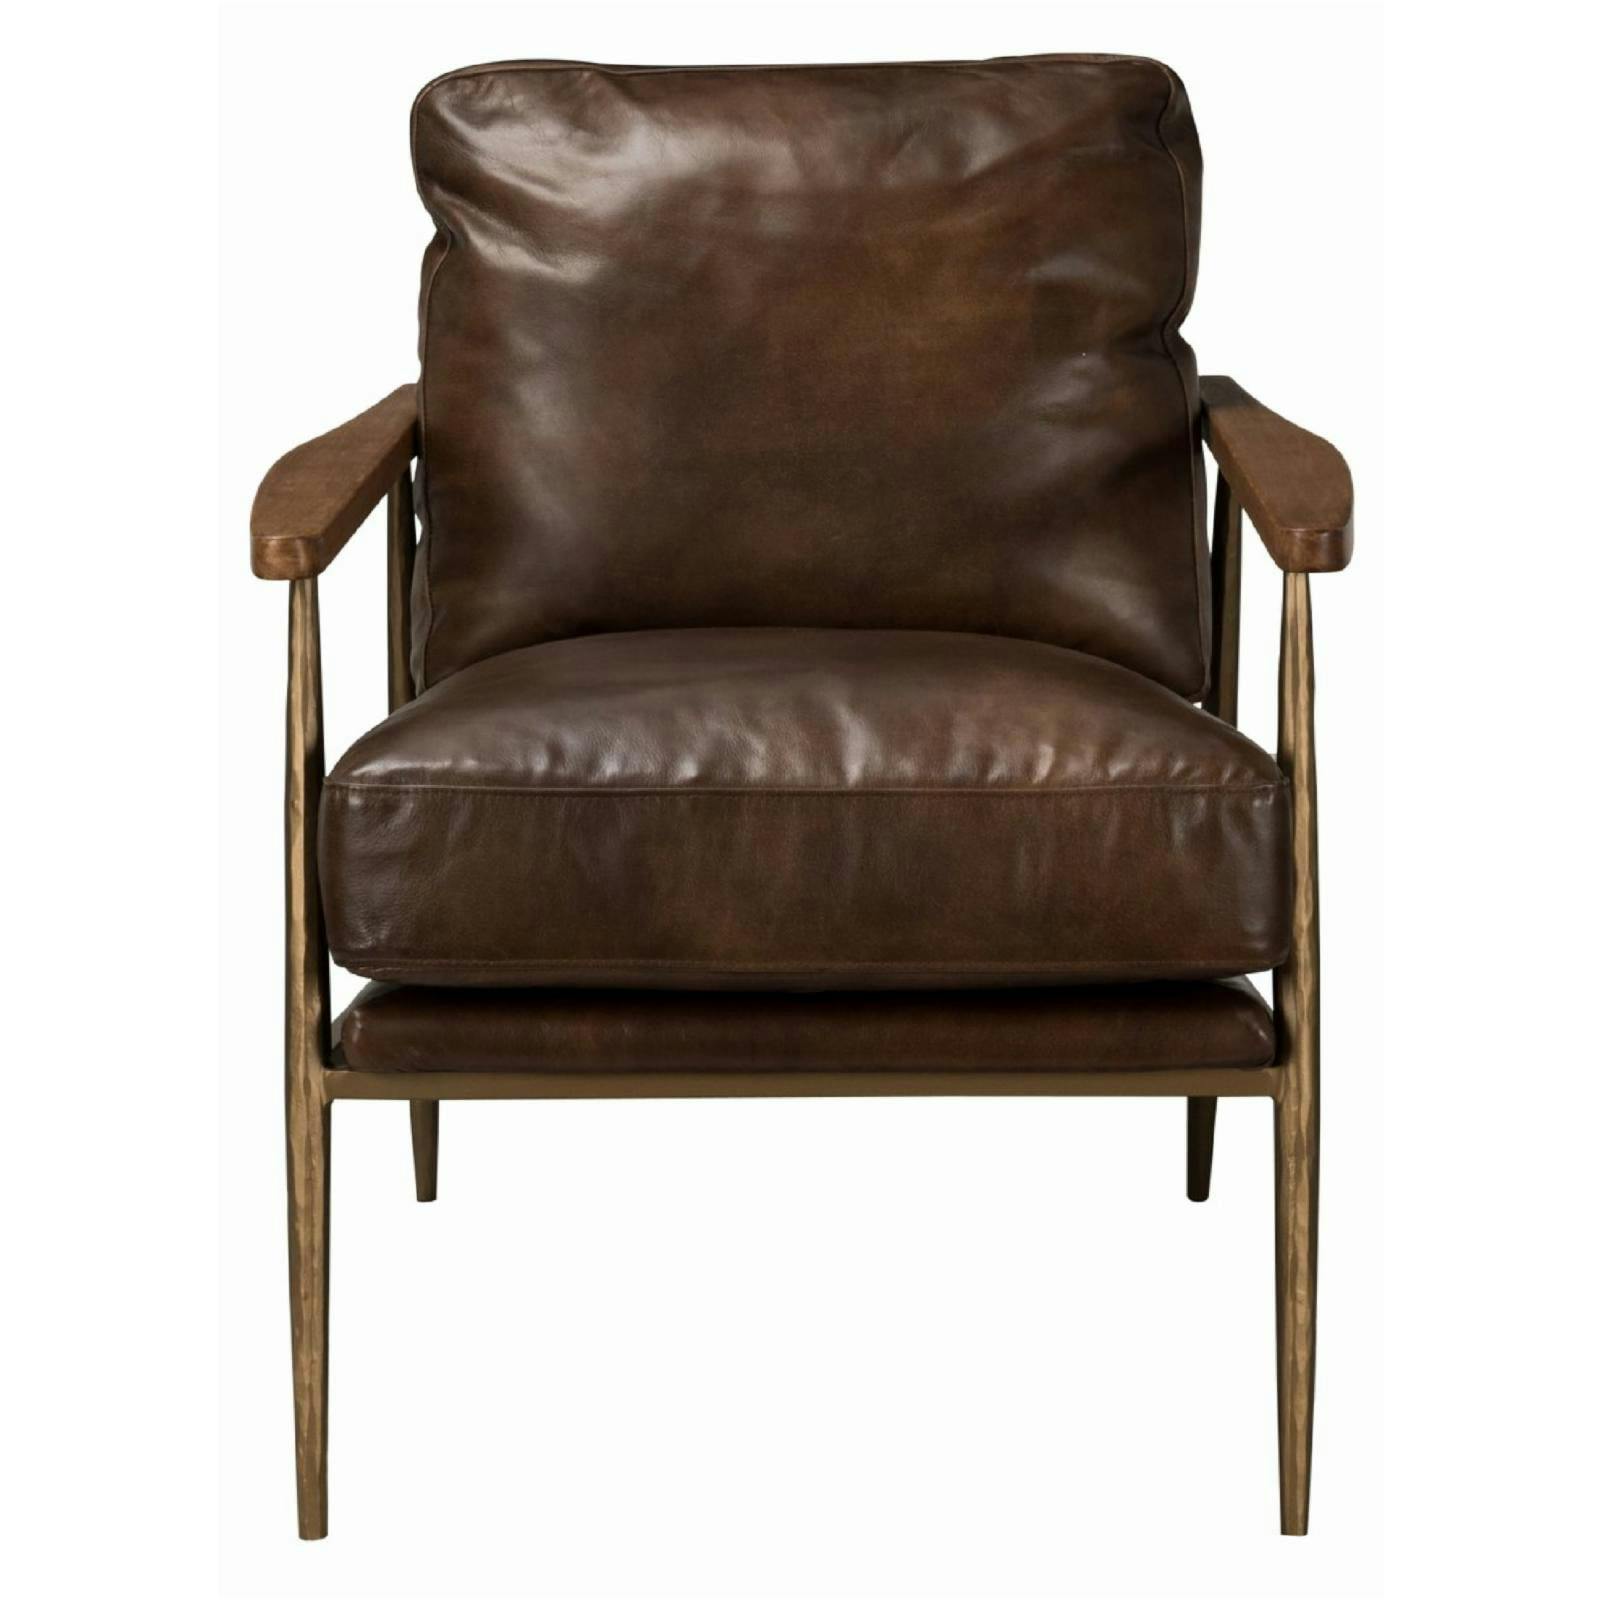 Transitional Handcrafted Antique Brown Leather Accent Chair